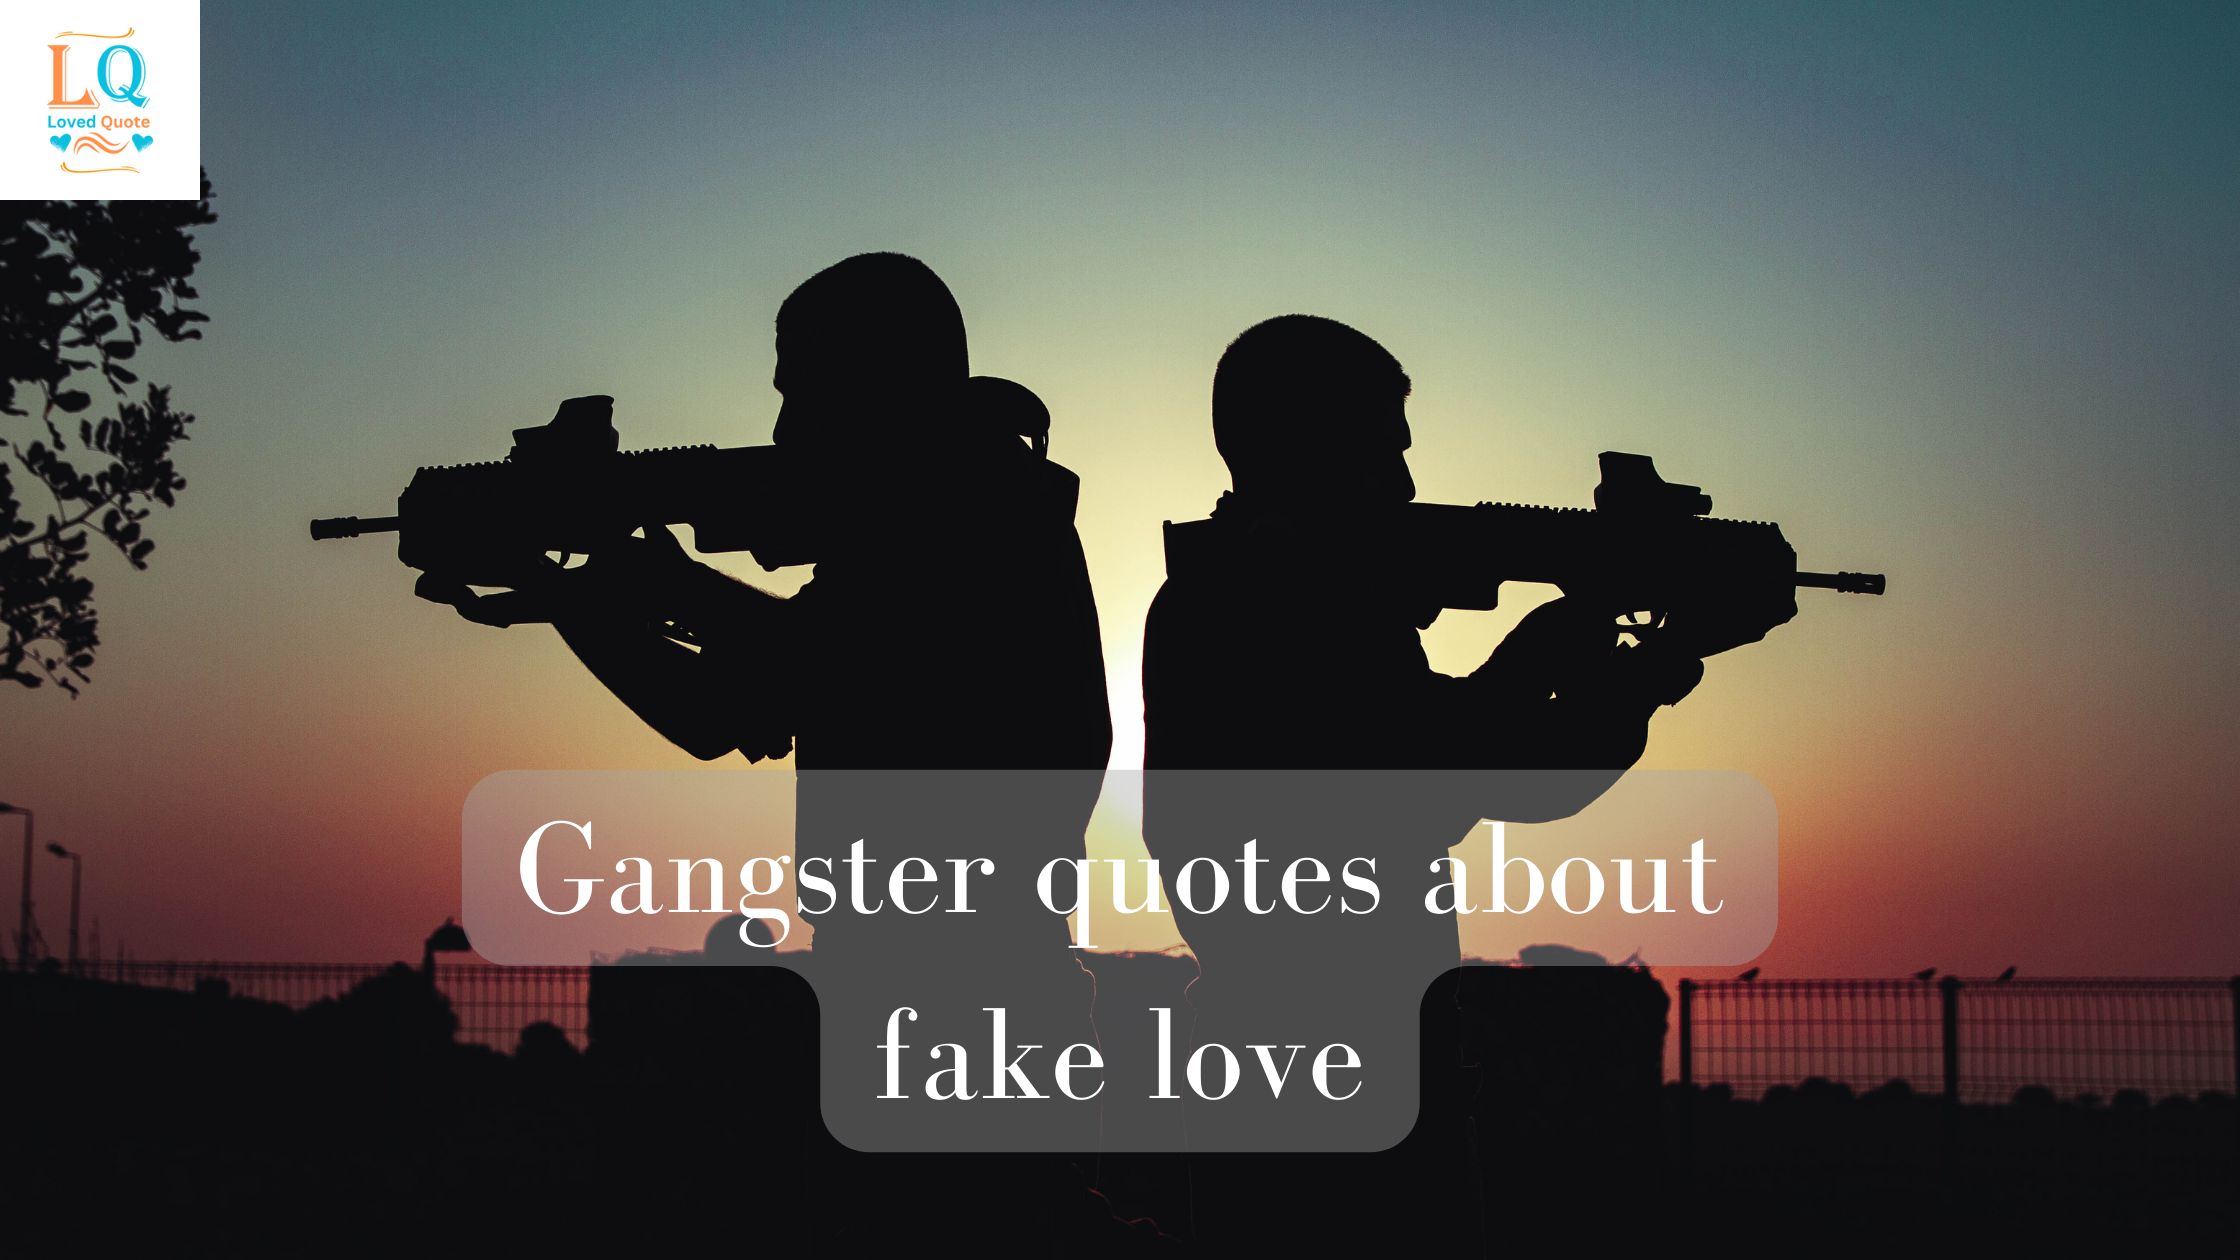 Gangster quotes about fake love